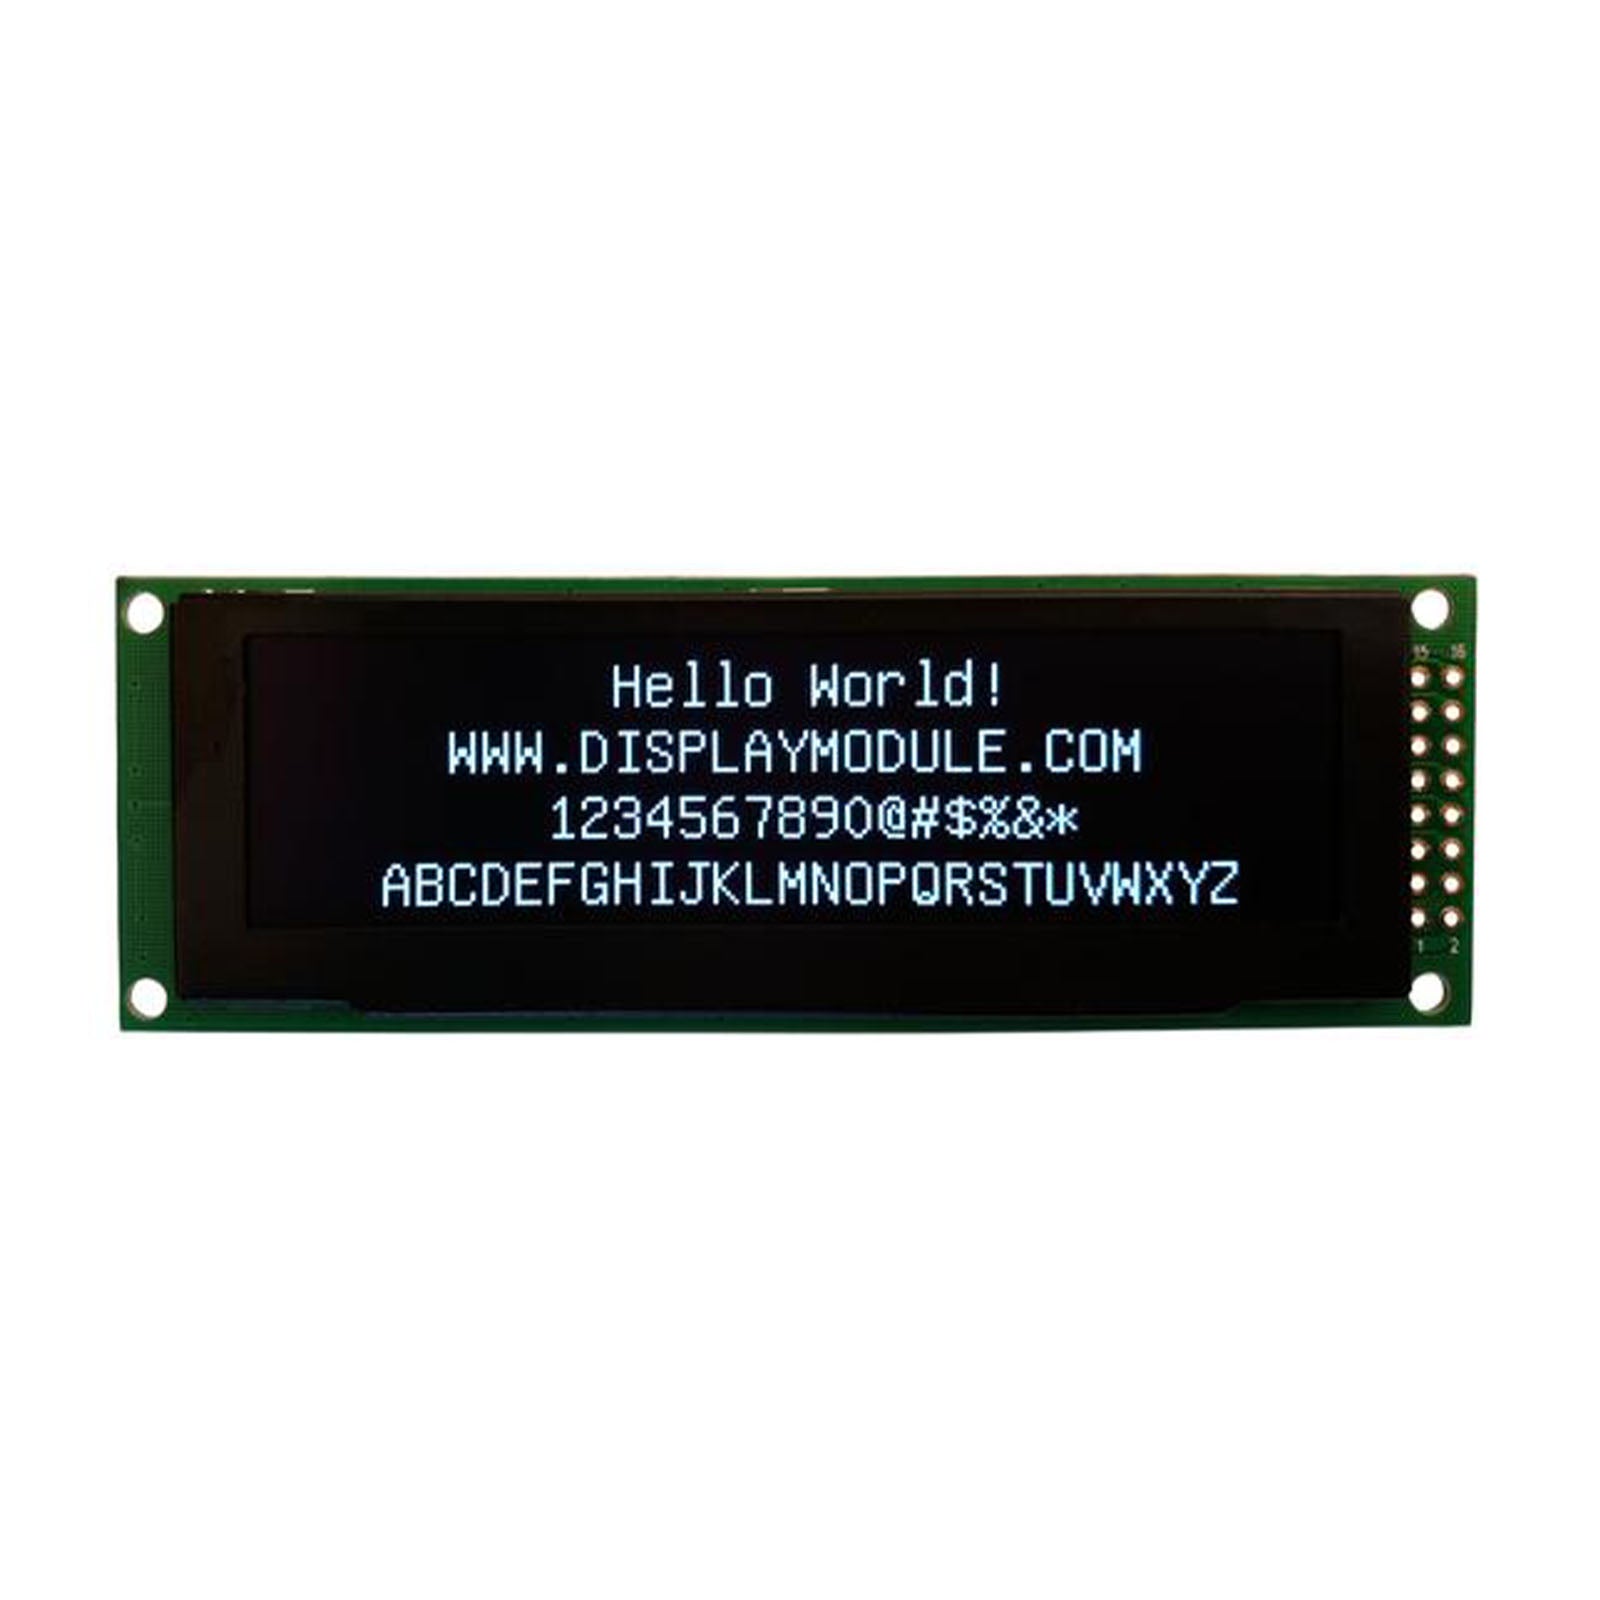 3.2 inch 256x64 white OLED screen displaying the text 'Hello World!'